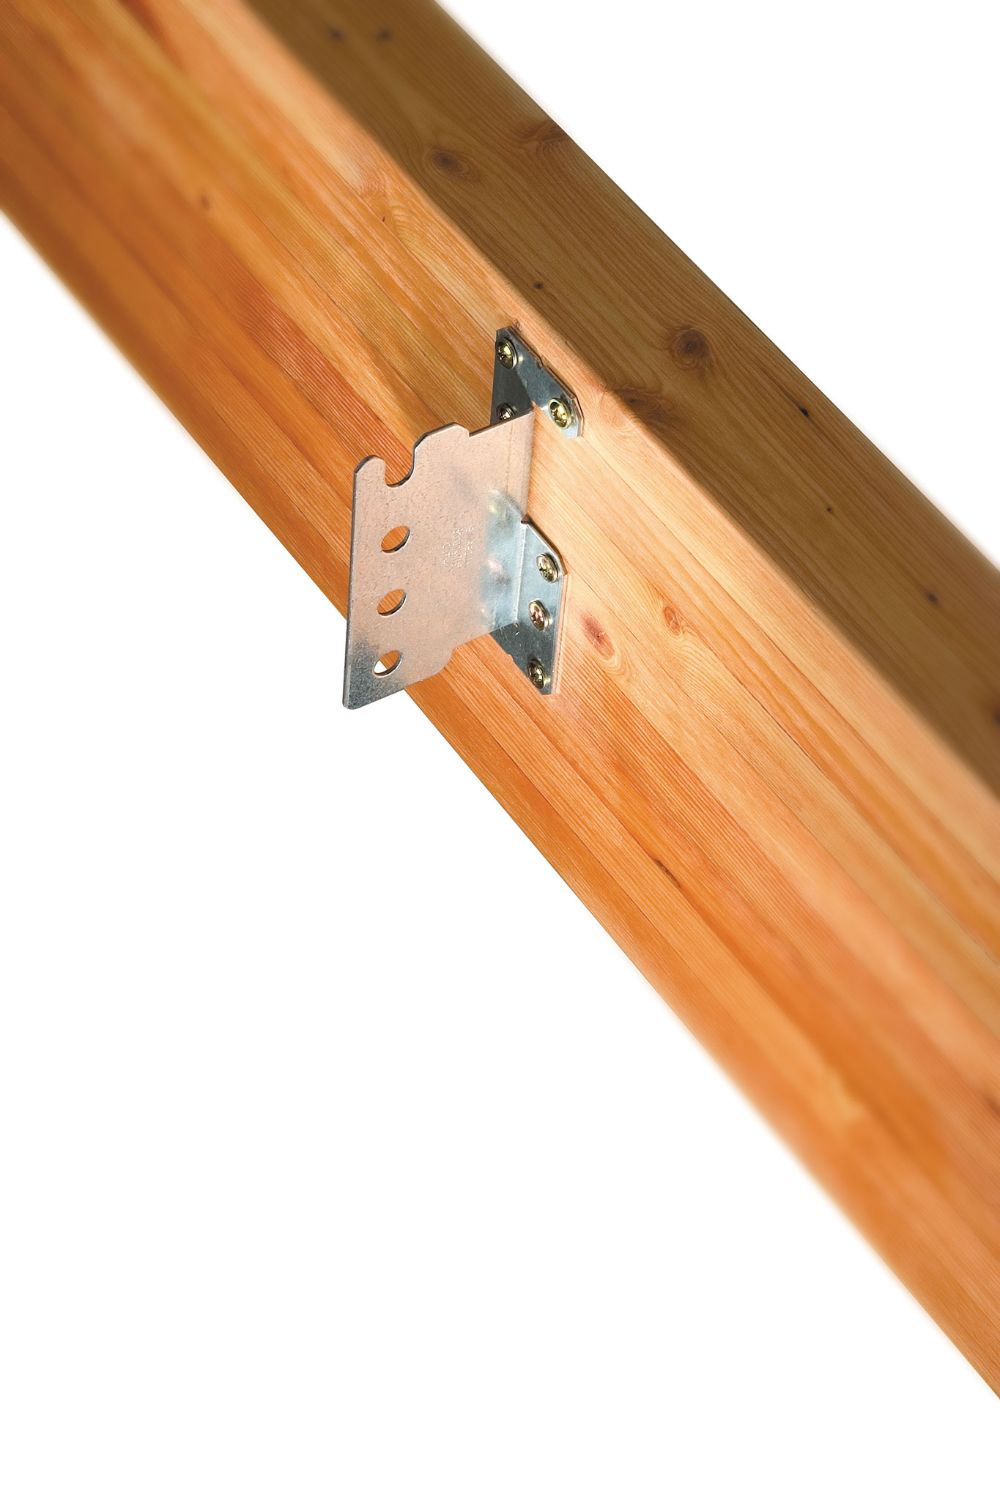 Simpson CJT3ZL Concealed Joist Tie w Long Pins ZMAX Finish image 2 of 5